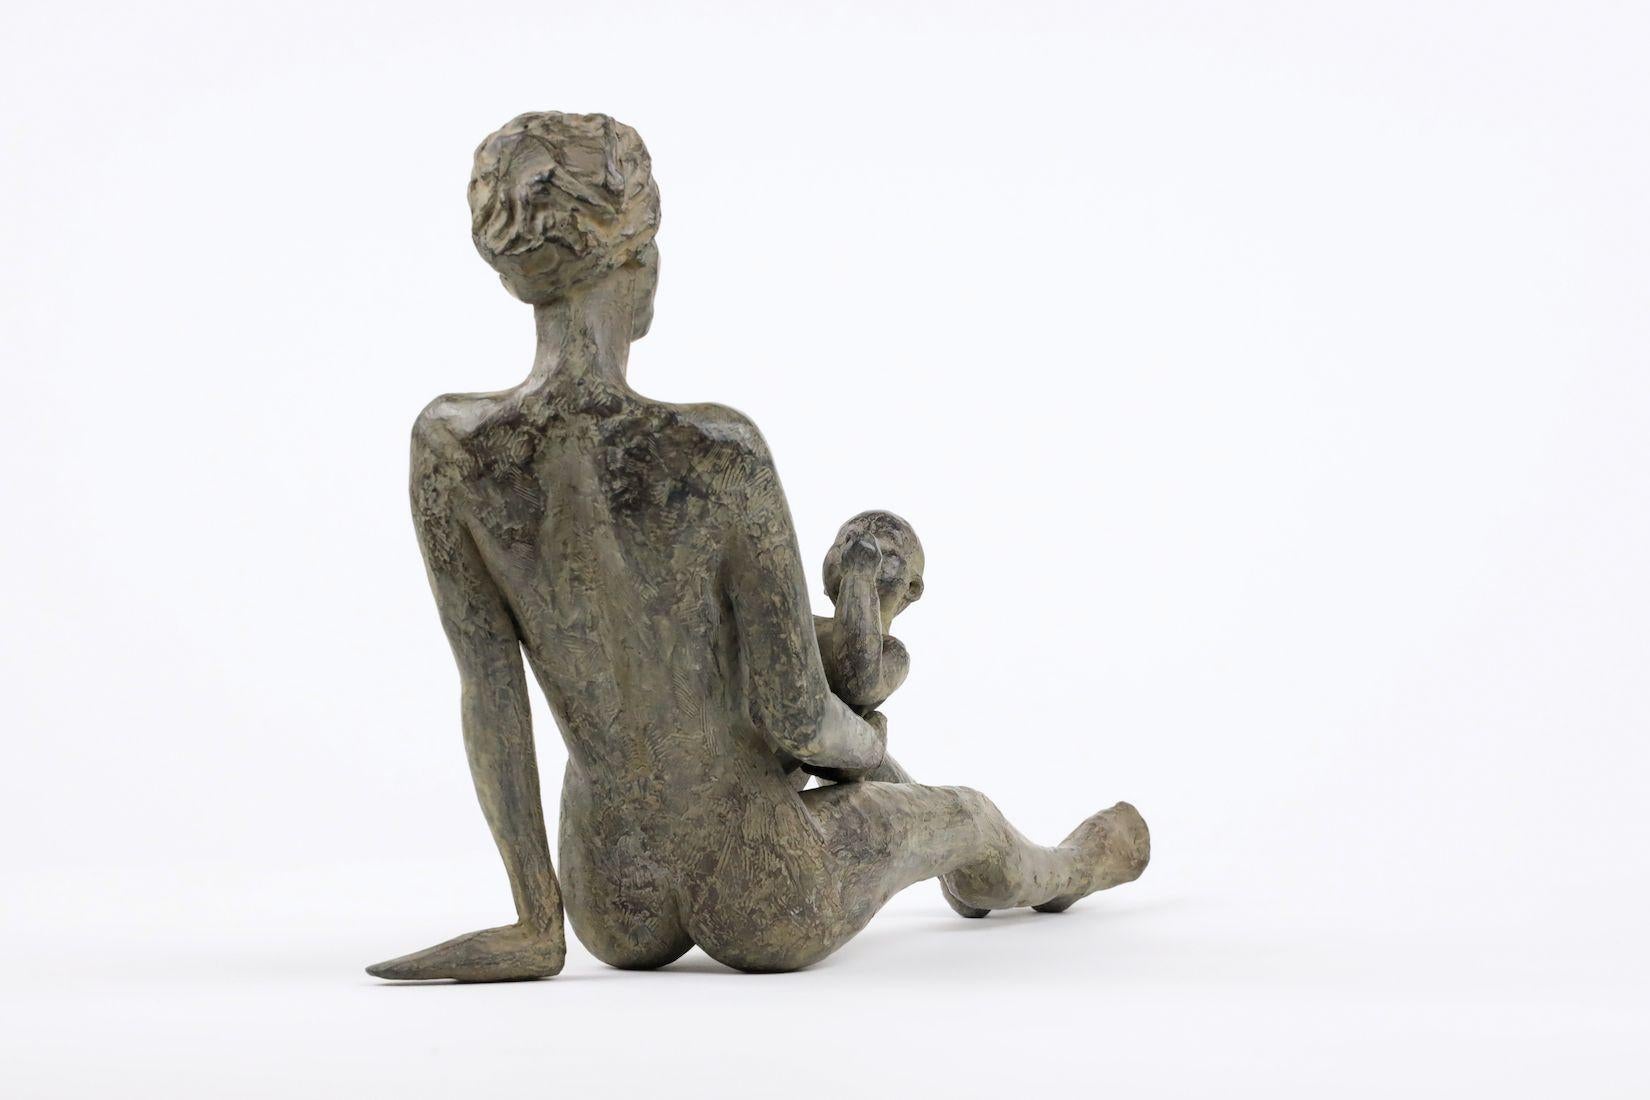 Babbling (Babillages), by French contemporary artist Marine de Soos.  
Bronze, 25.5 cm × 40 cm × 13 cm. Limited edition of 8 copies and IV artist’s proofs.
Each of Marine de Soos' sculptures has its story, being a memory of a real moment or an